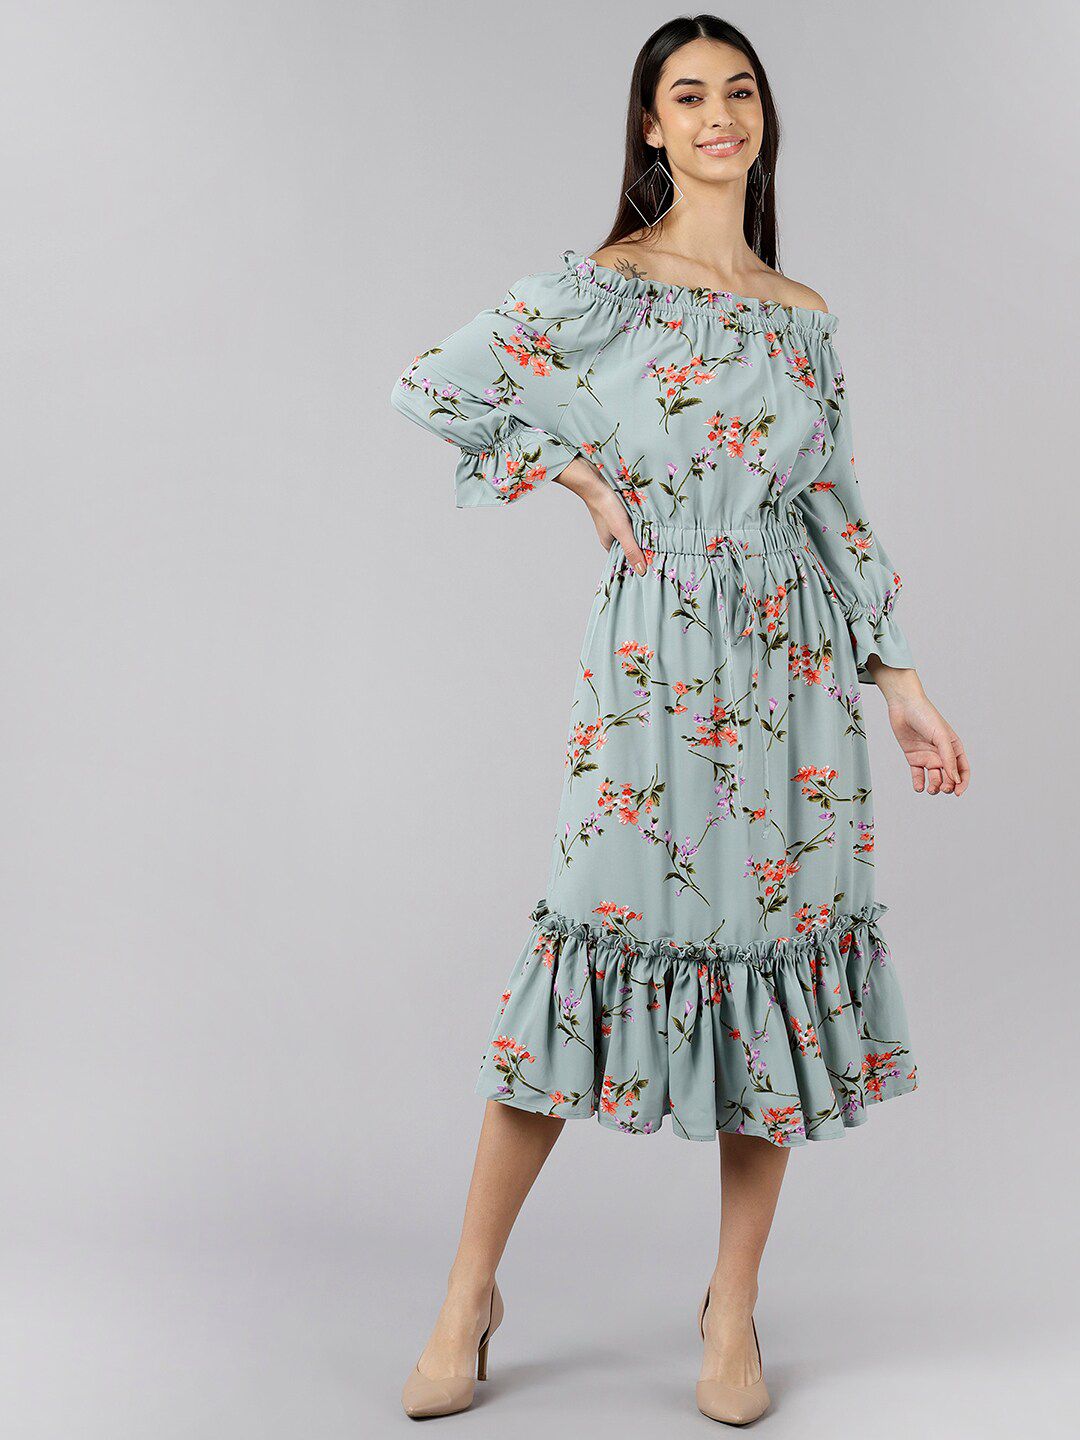 AHIKA Women Blue Floral Printed Off-Shoulder Crepe Fit & Flare Dress Price in India